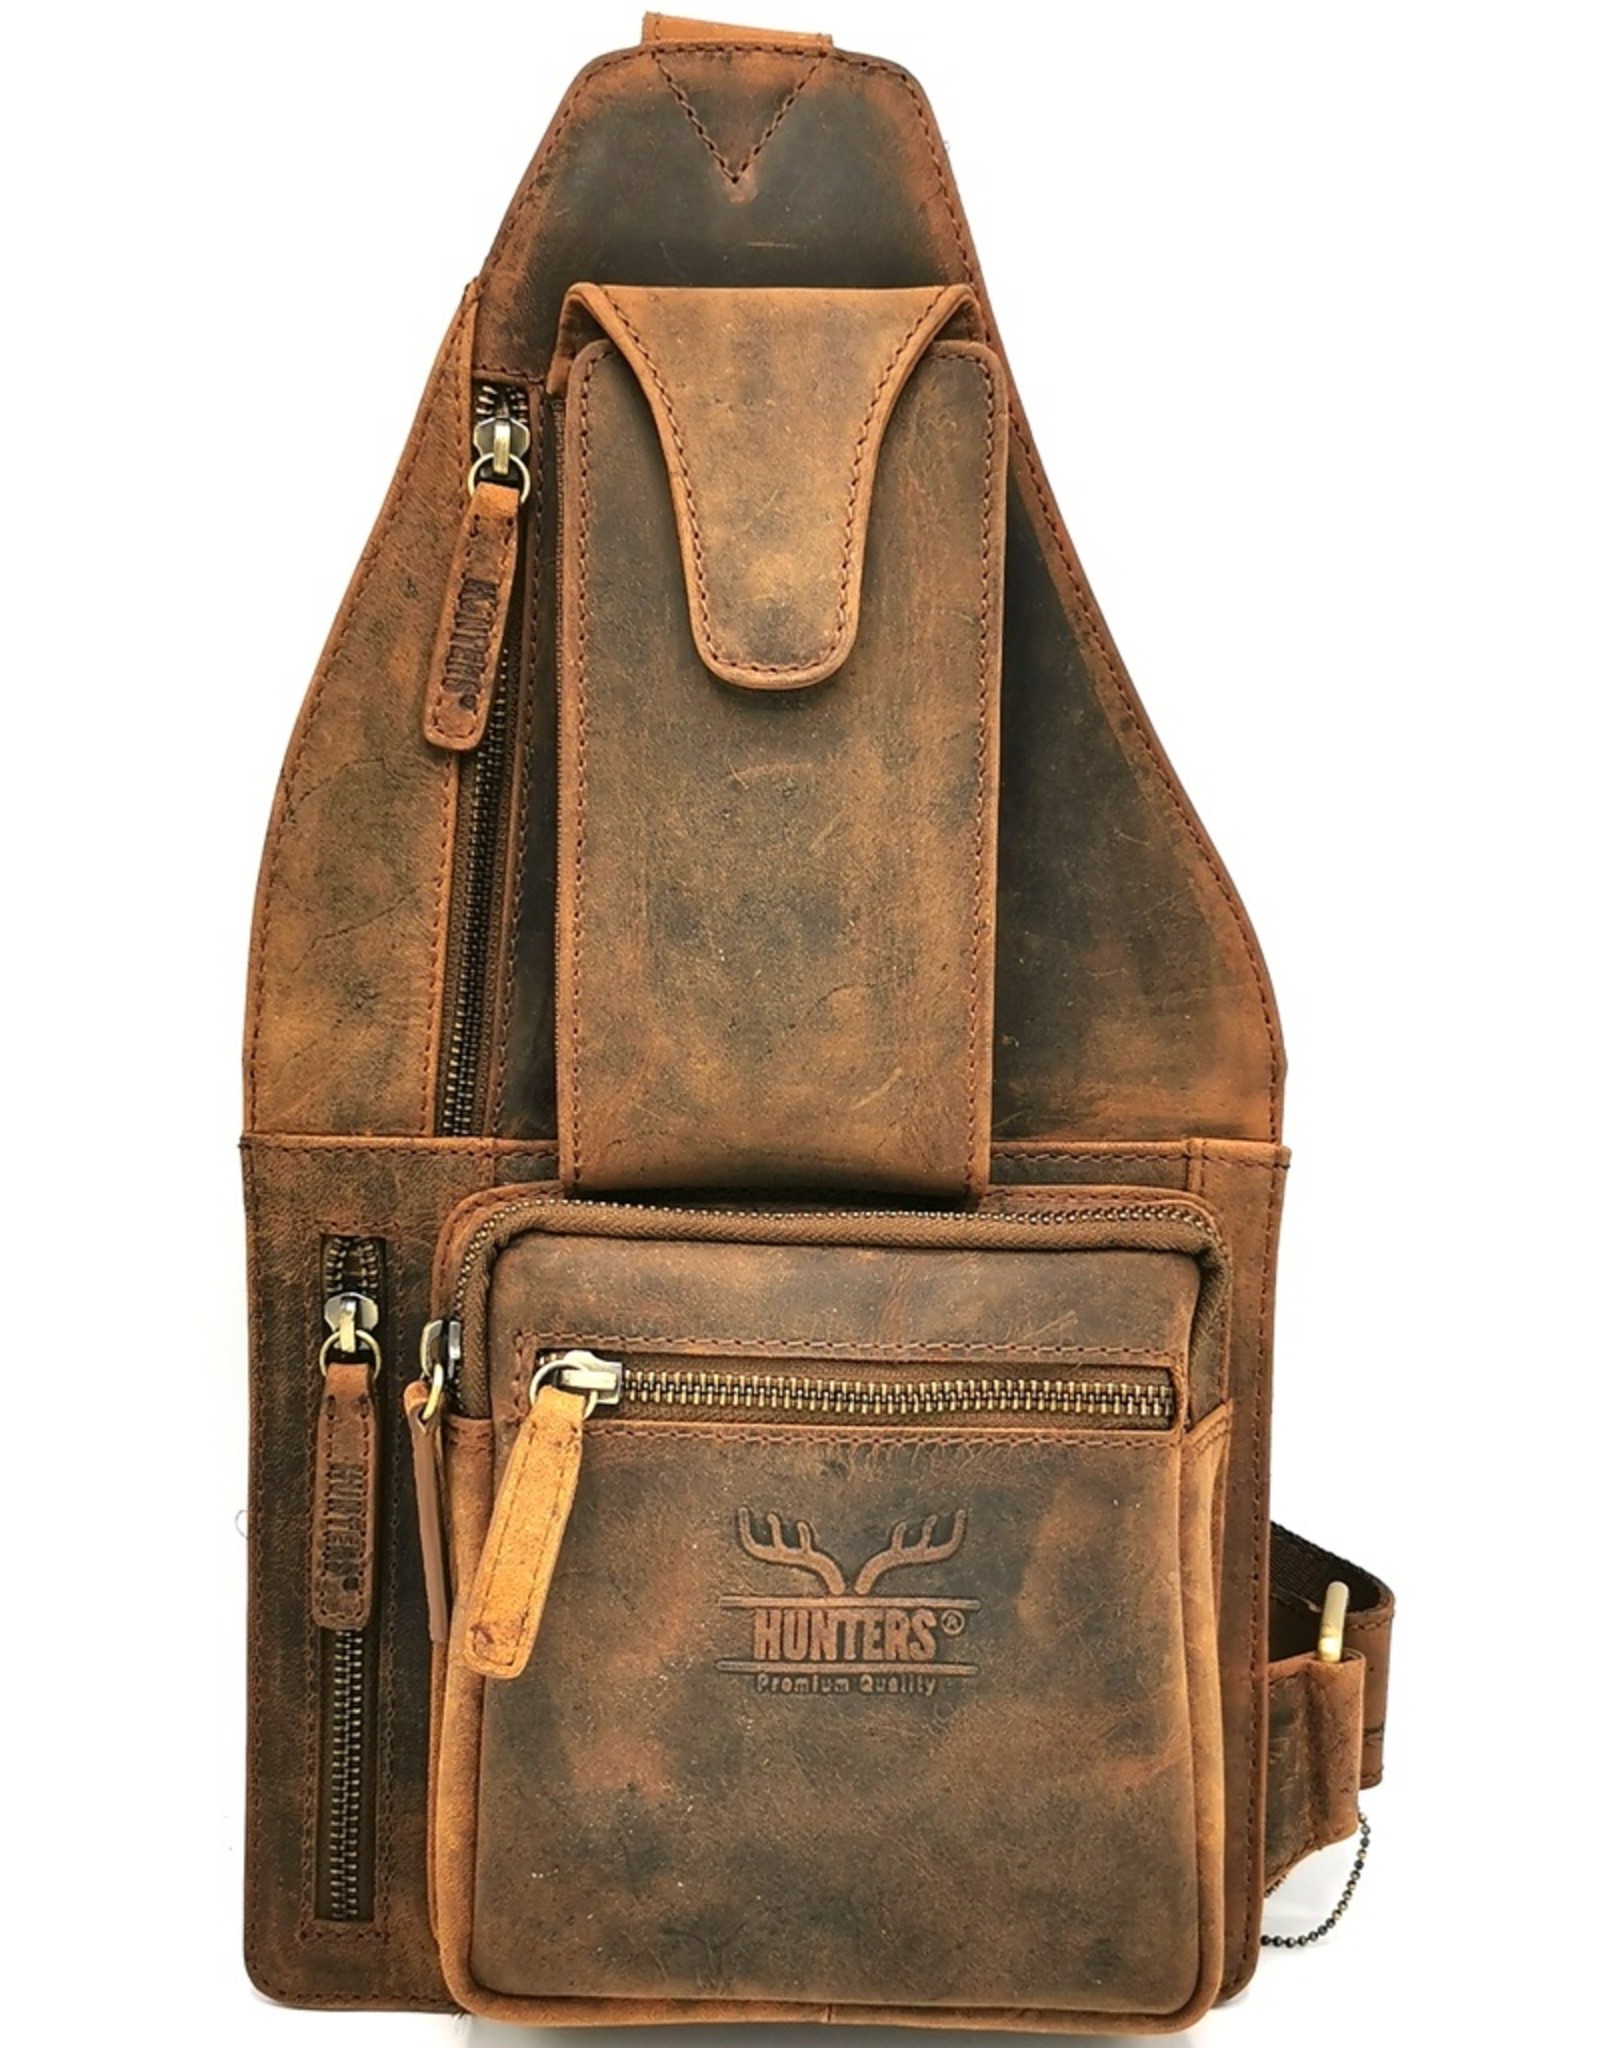 Hunters Leather Shoulder bags  Leather crossbody bags - Hunters Crossbody Holster bag Buffalo Leather